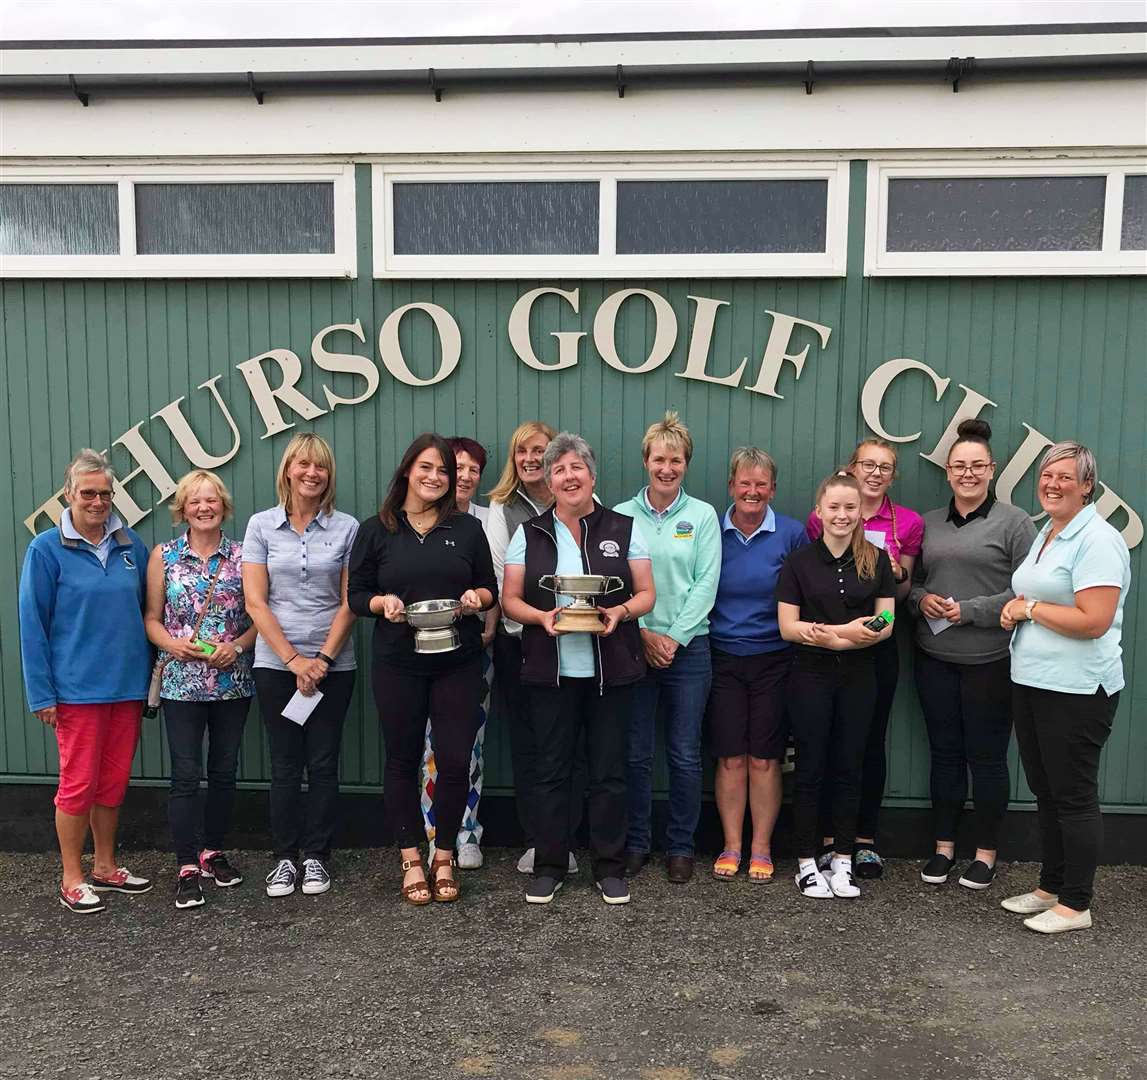 Prize-winners in the Thurso Ladies' Open.